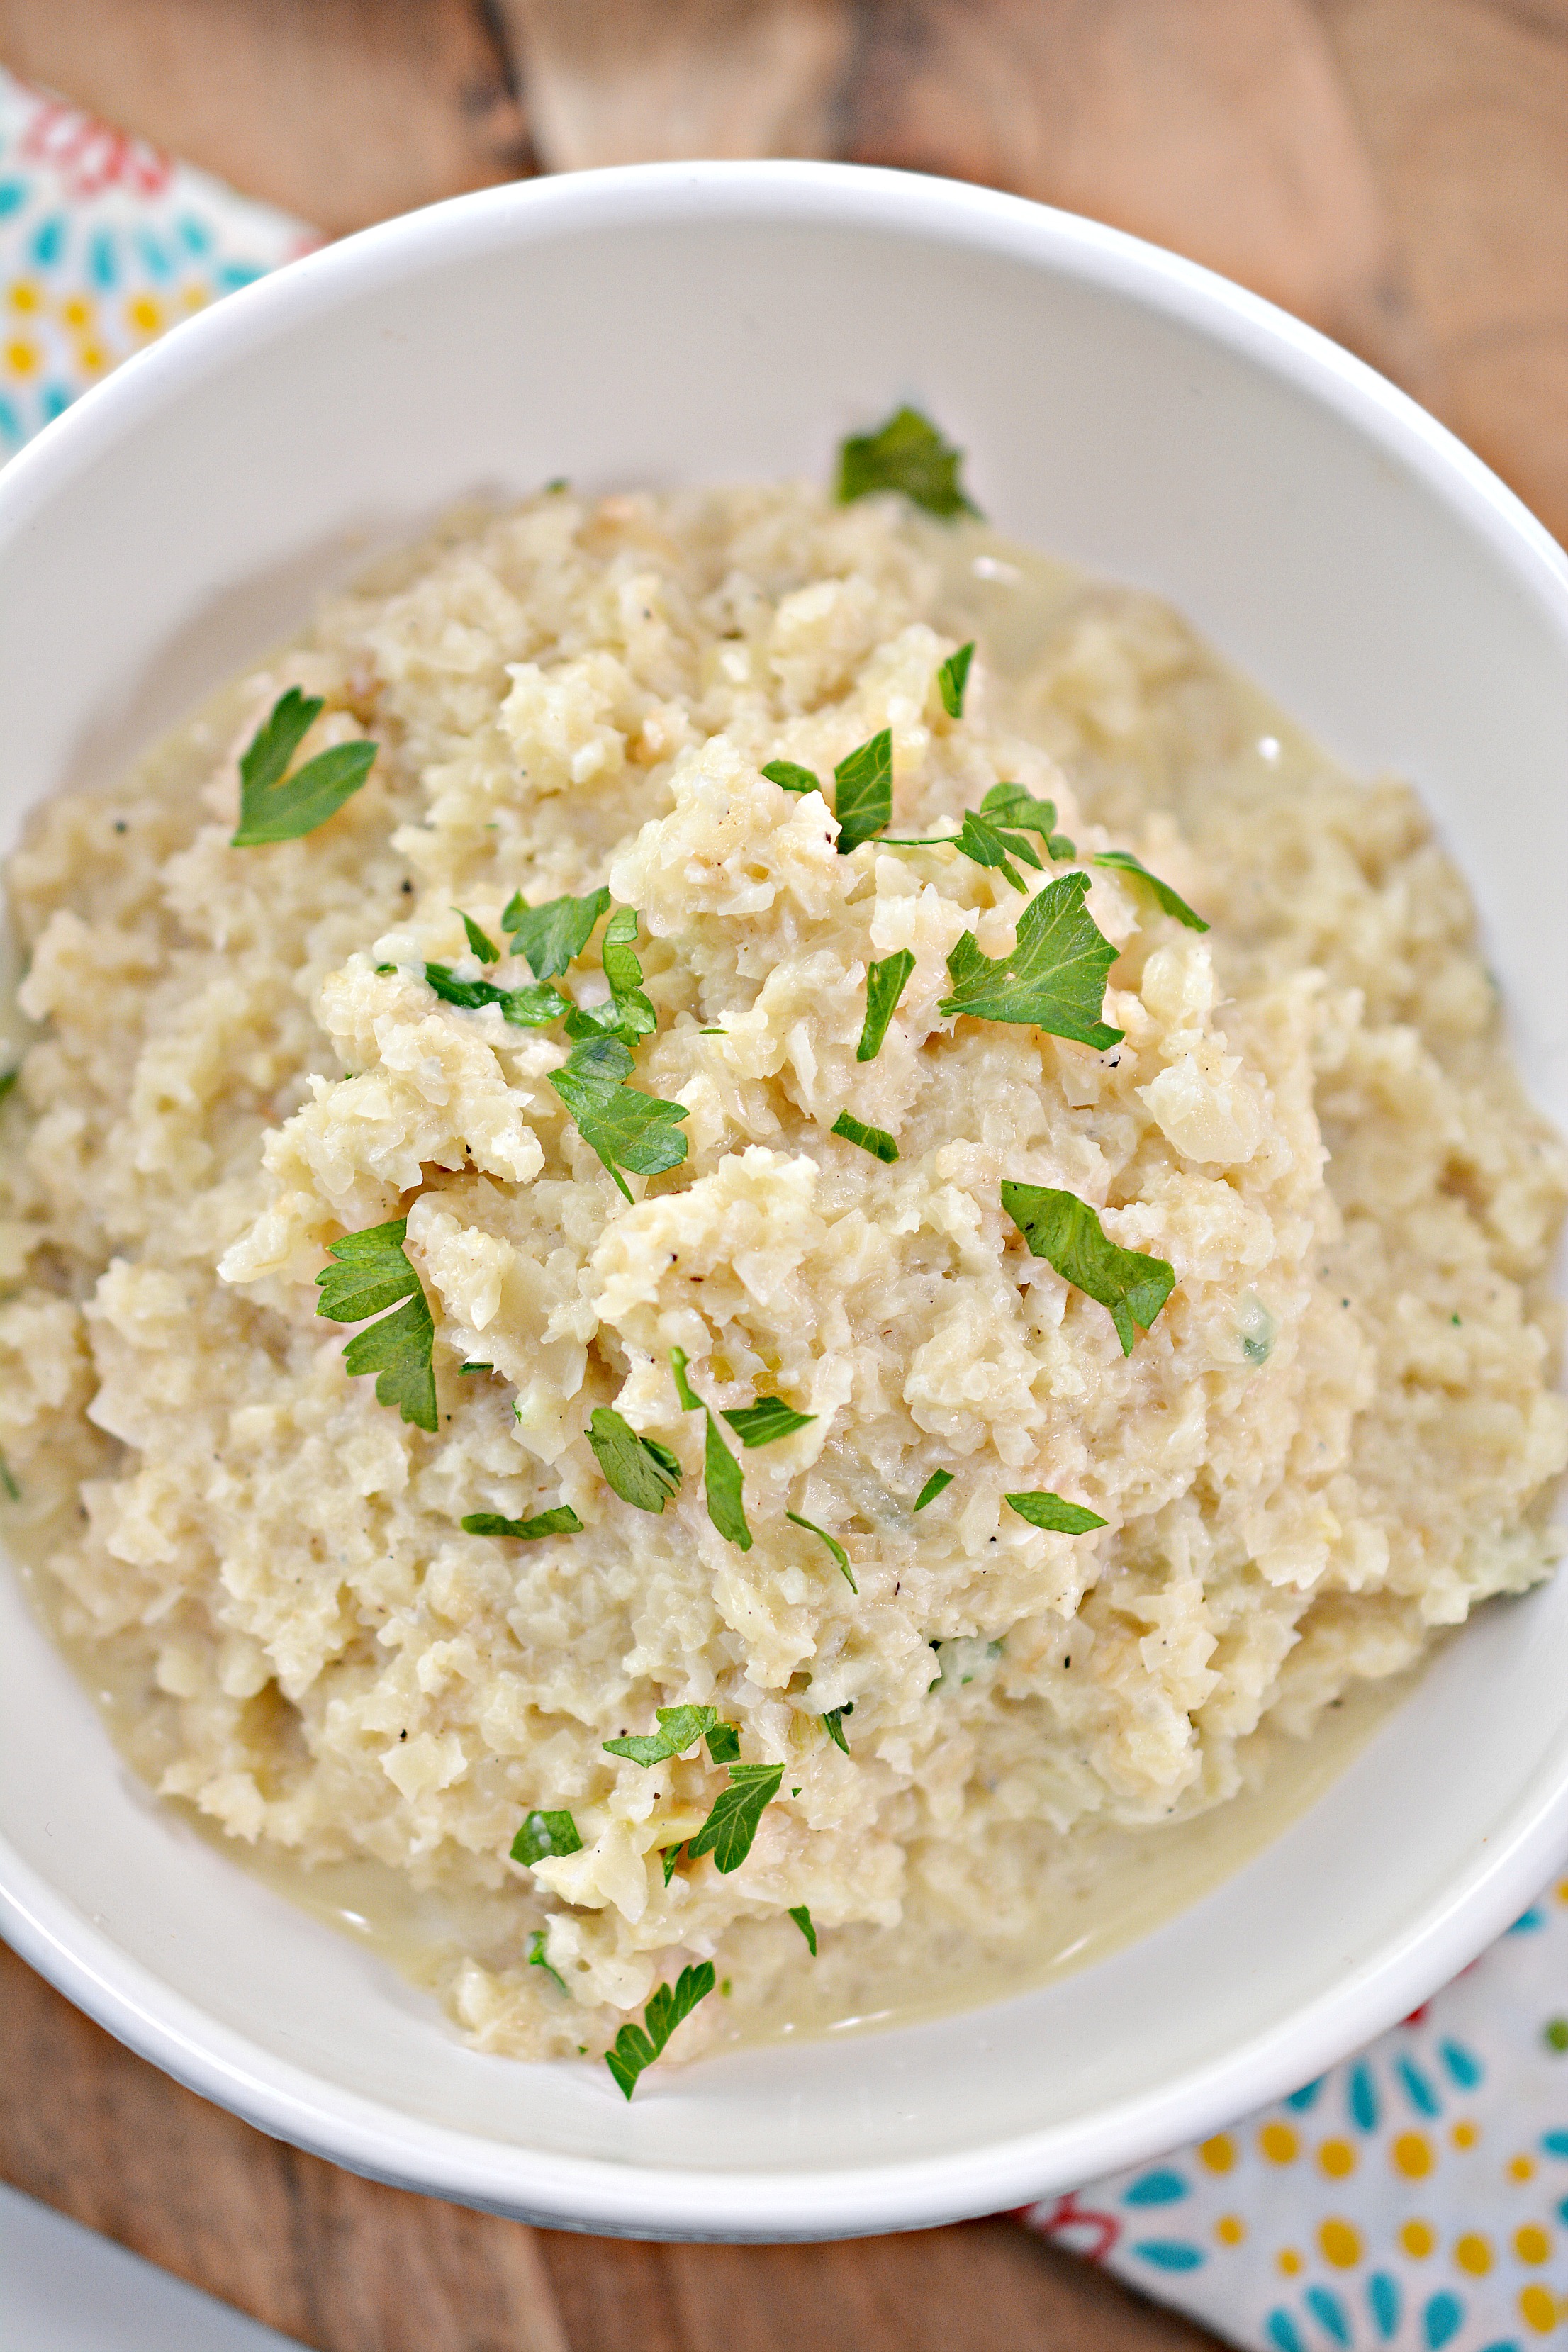 Love risotto but trying to live a Keto lifestyle? You need this Keto Parmesan Cauliflower Risotto recipe. Just as tasty as risotto made from rice, this keto risotto recipe is made from cauliflower and is low in carbs. Perfect for a Keto or Low Carb Lifestyle. 